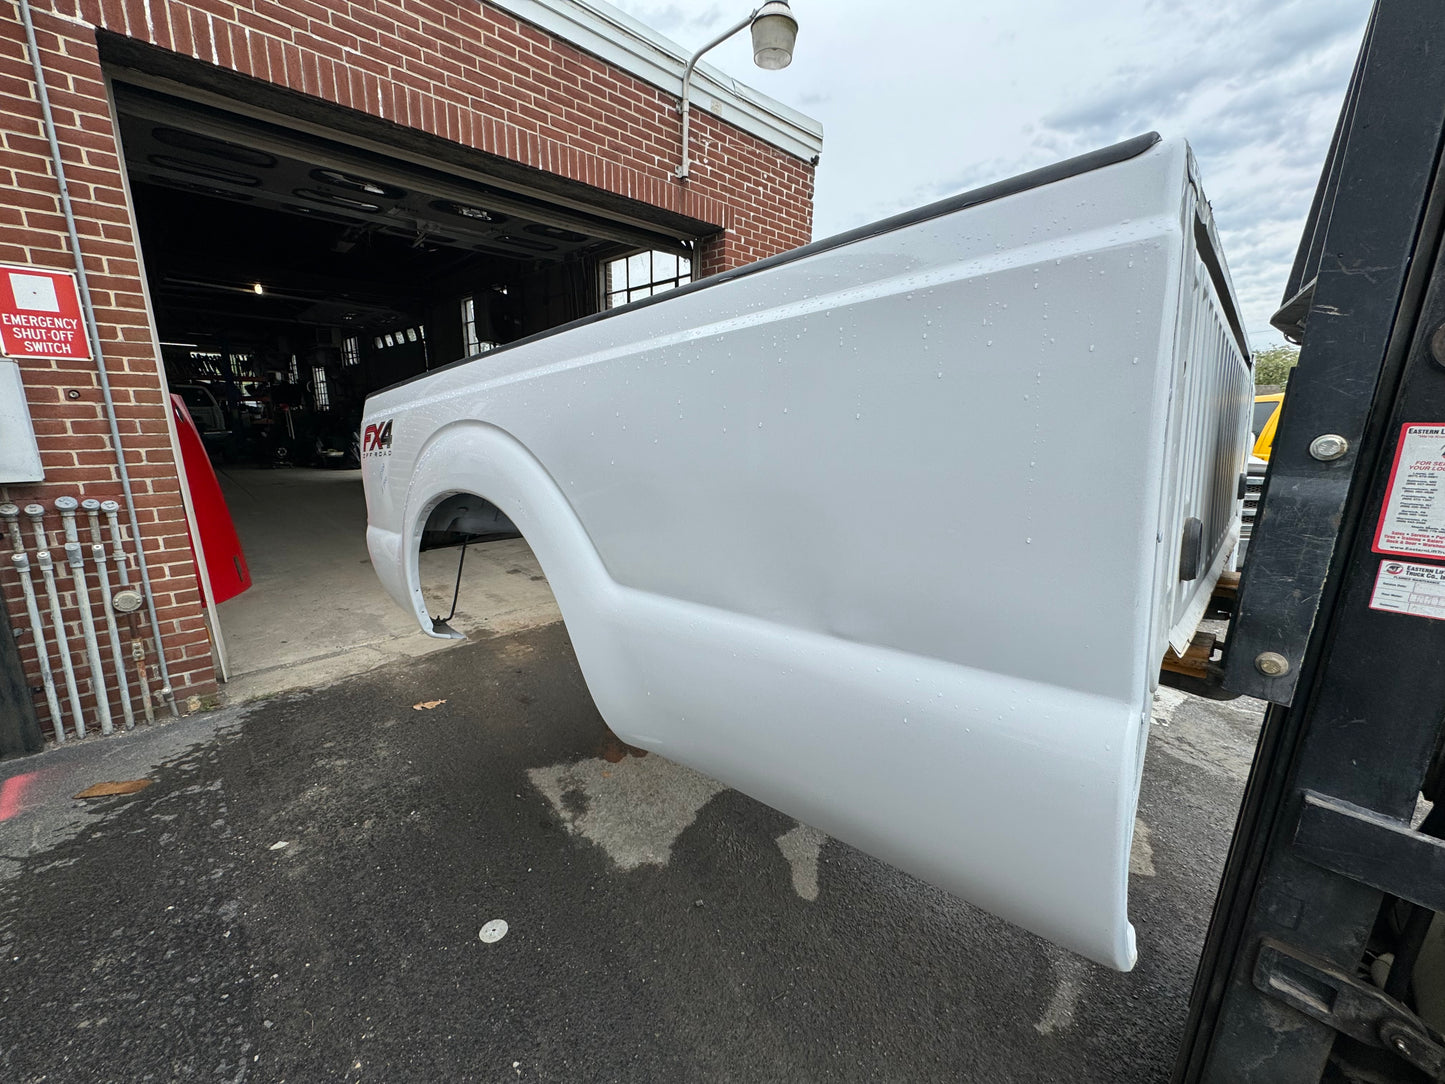 2011-2016 Superduty 8’ bed Oxford white #125100